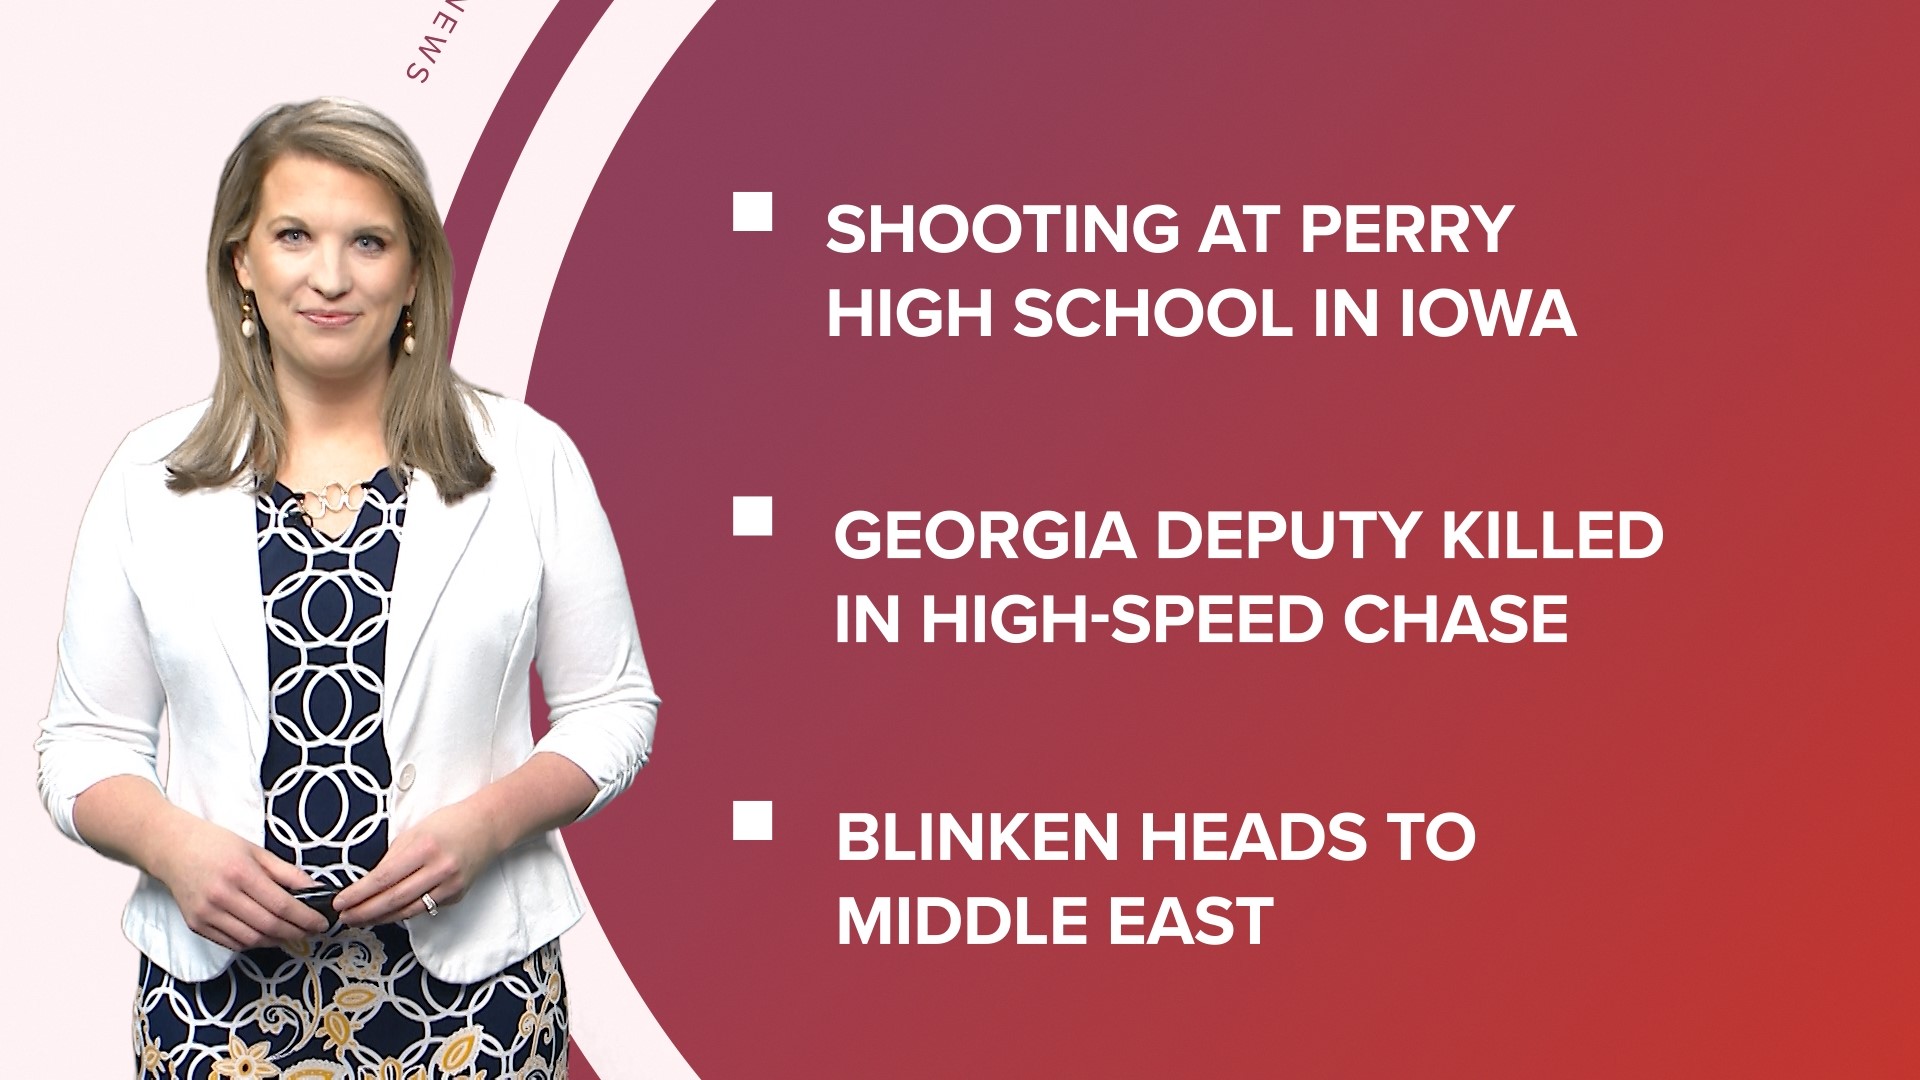 A look at what is happening in the news from the aftermath of a deadly school shooting in Iowa to preparing for the Iowa caucuses and a teen "beats" the game Tetris.